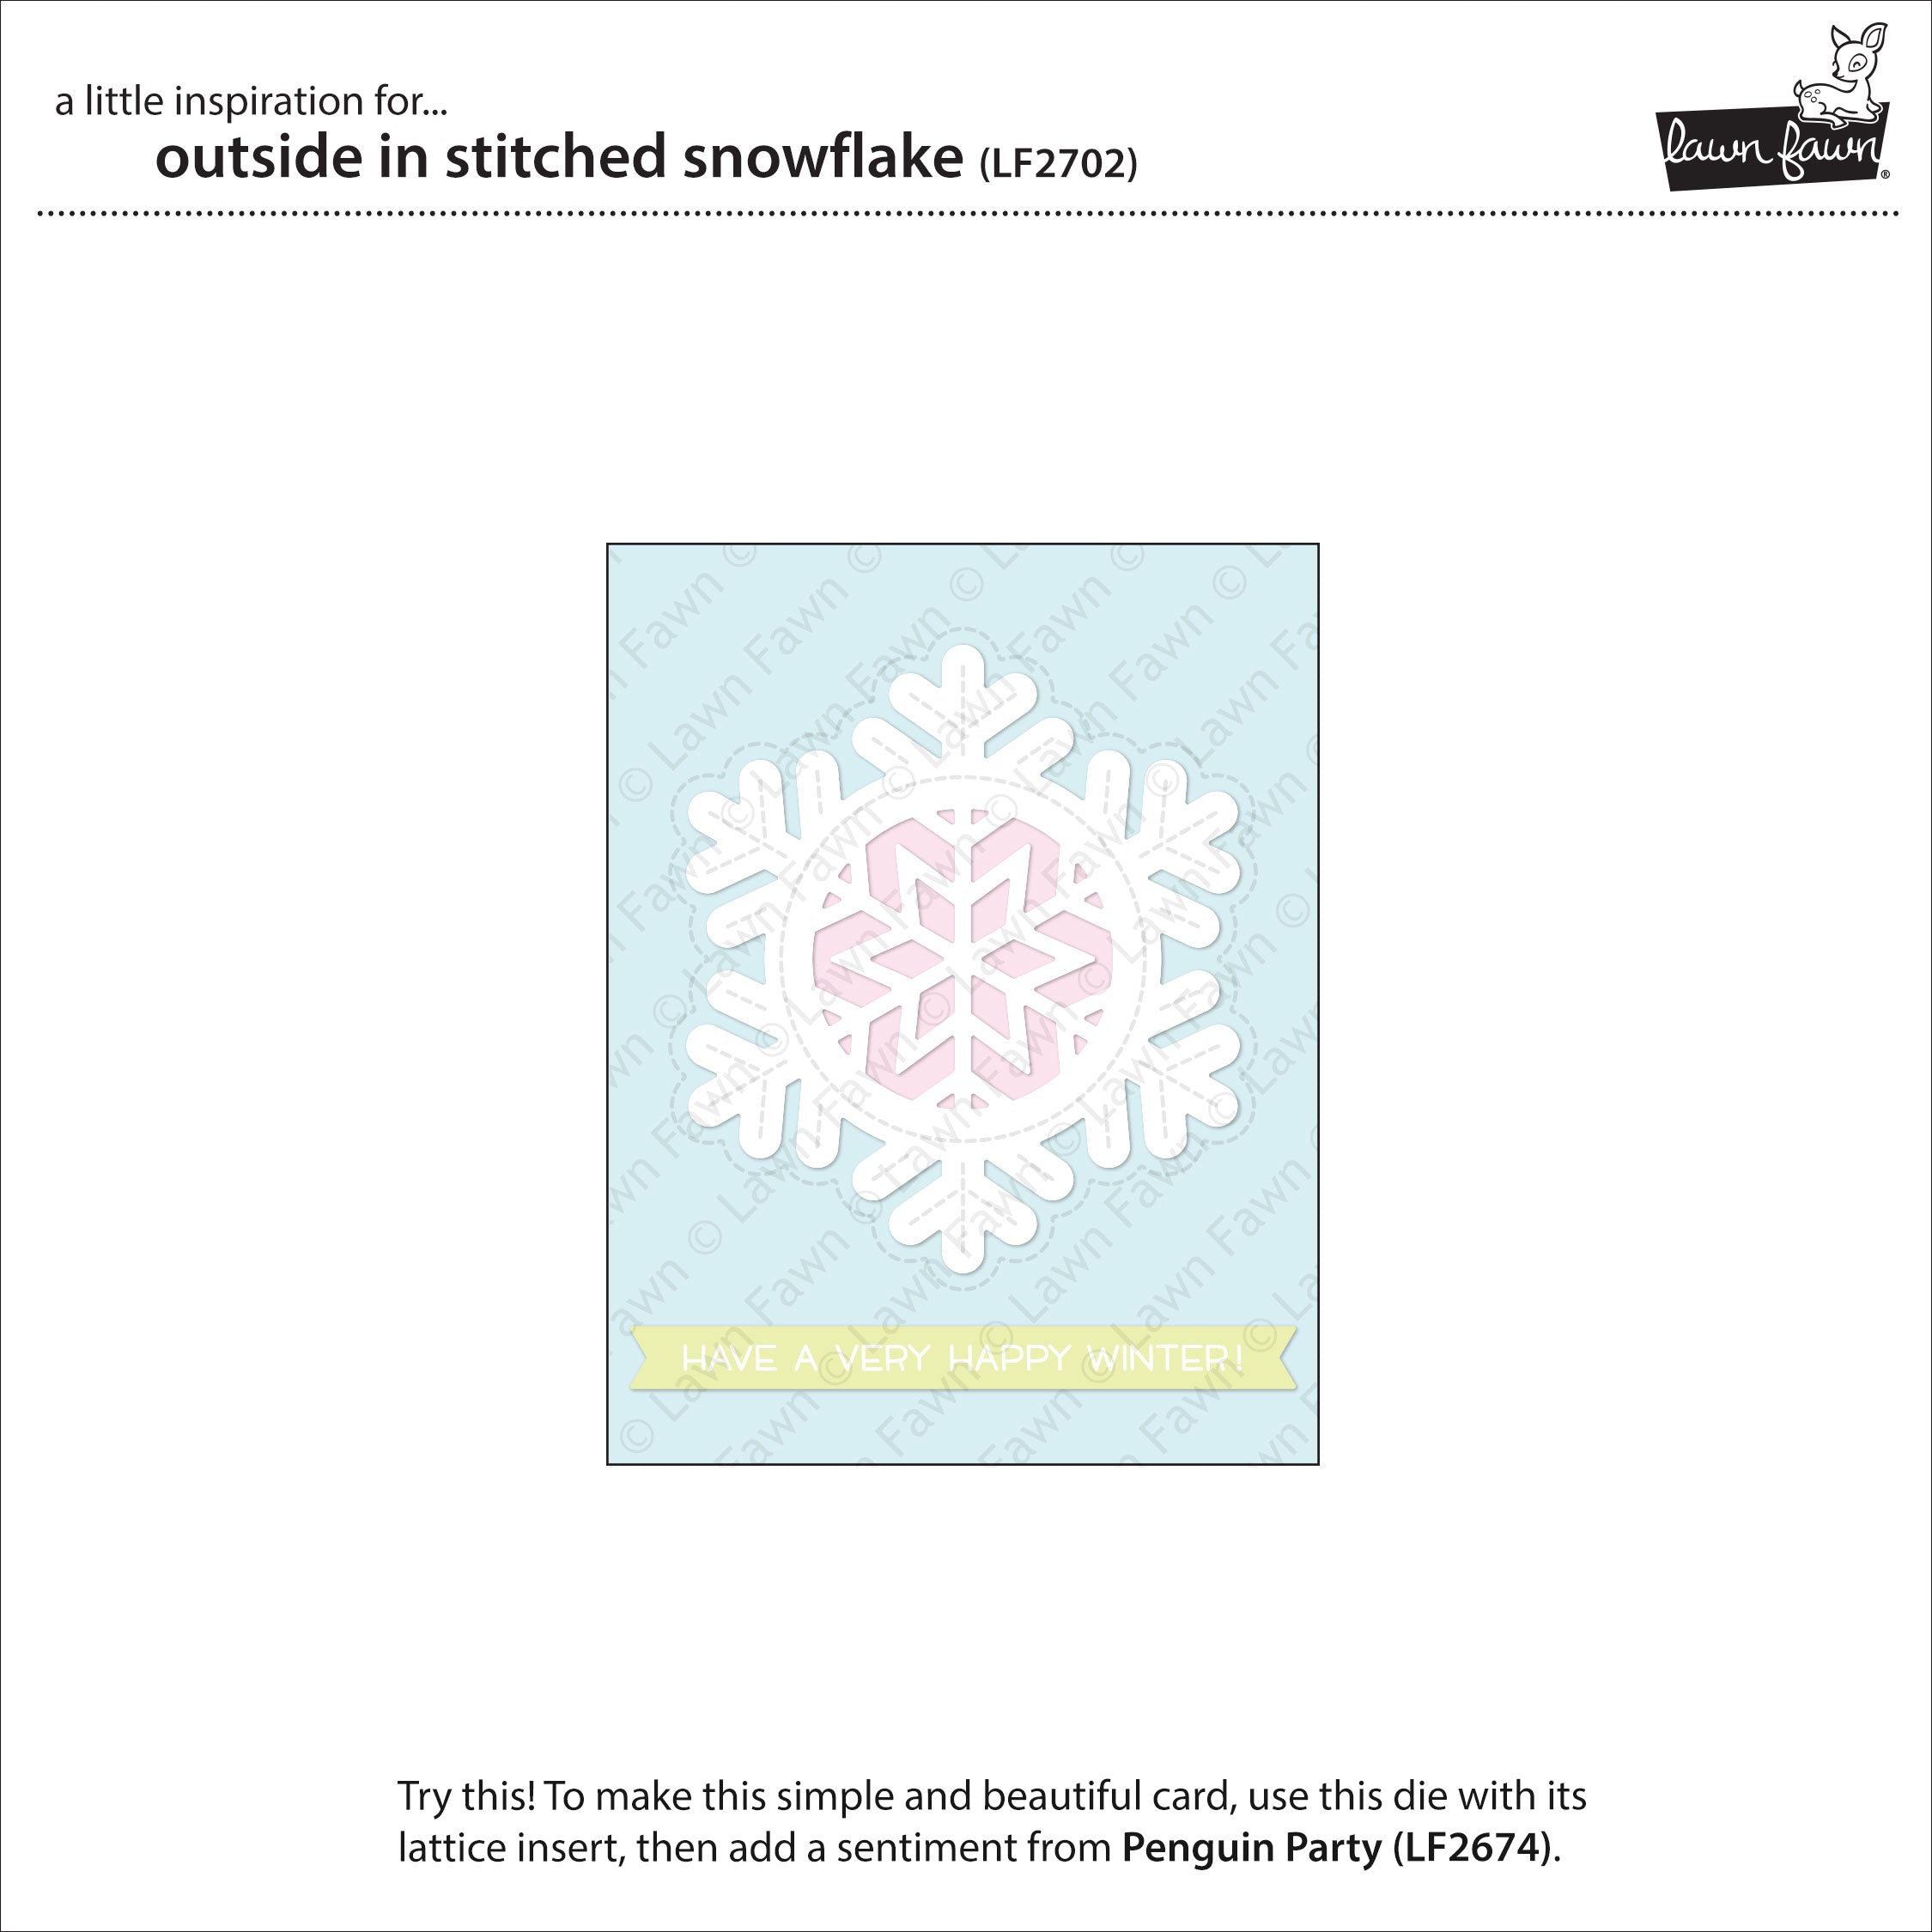 outside in stitched snowflake